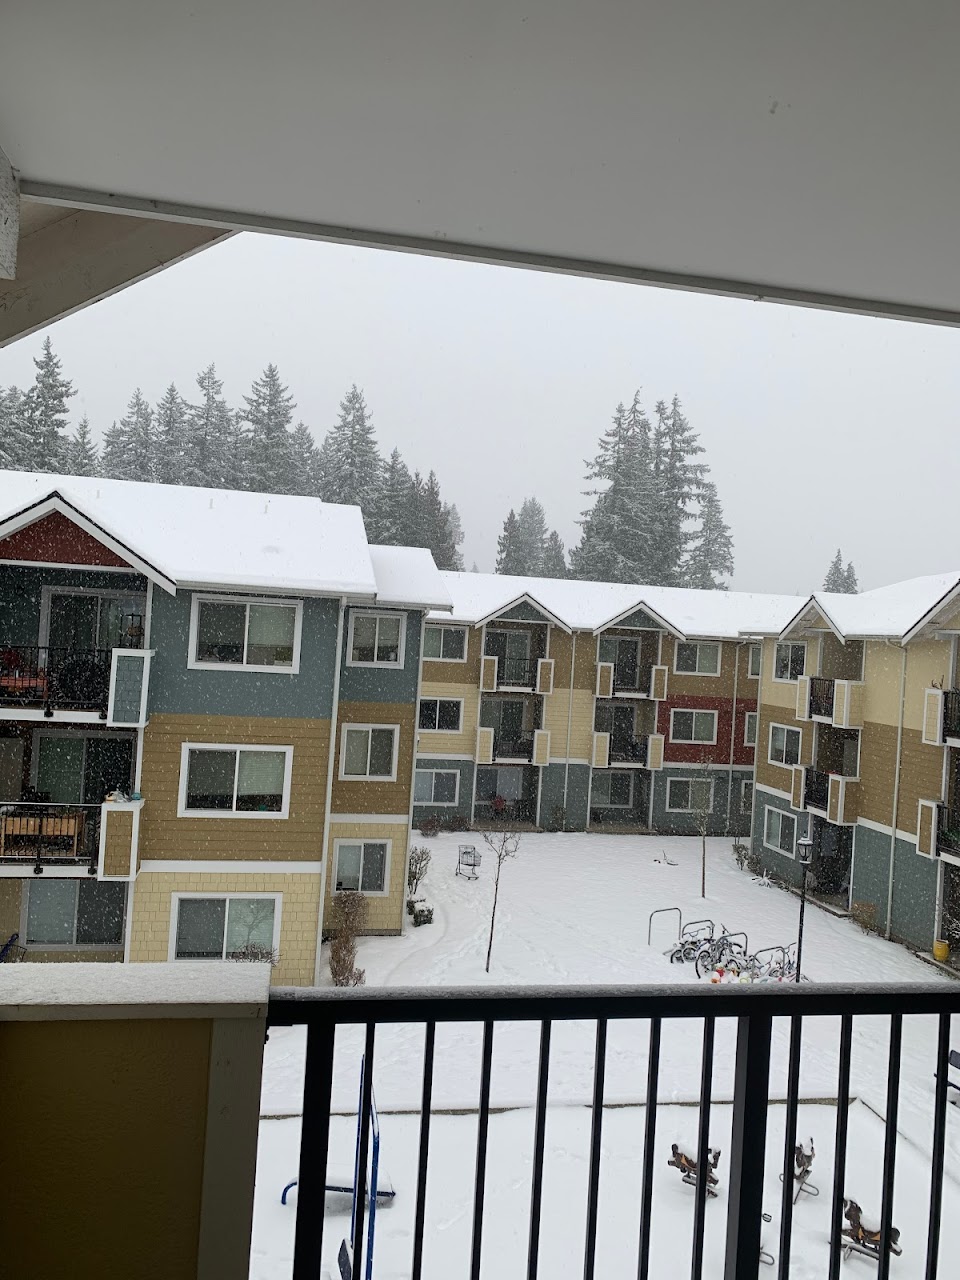 Photo of QUILCEDA CREEK APARTMENTS. Affordable housing located at 12115 STATE AVE. MARYSVILLE, WA 98271